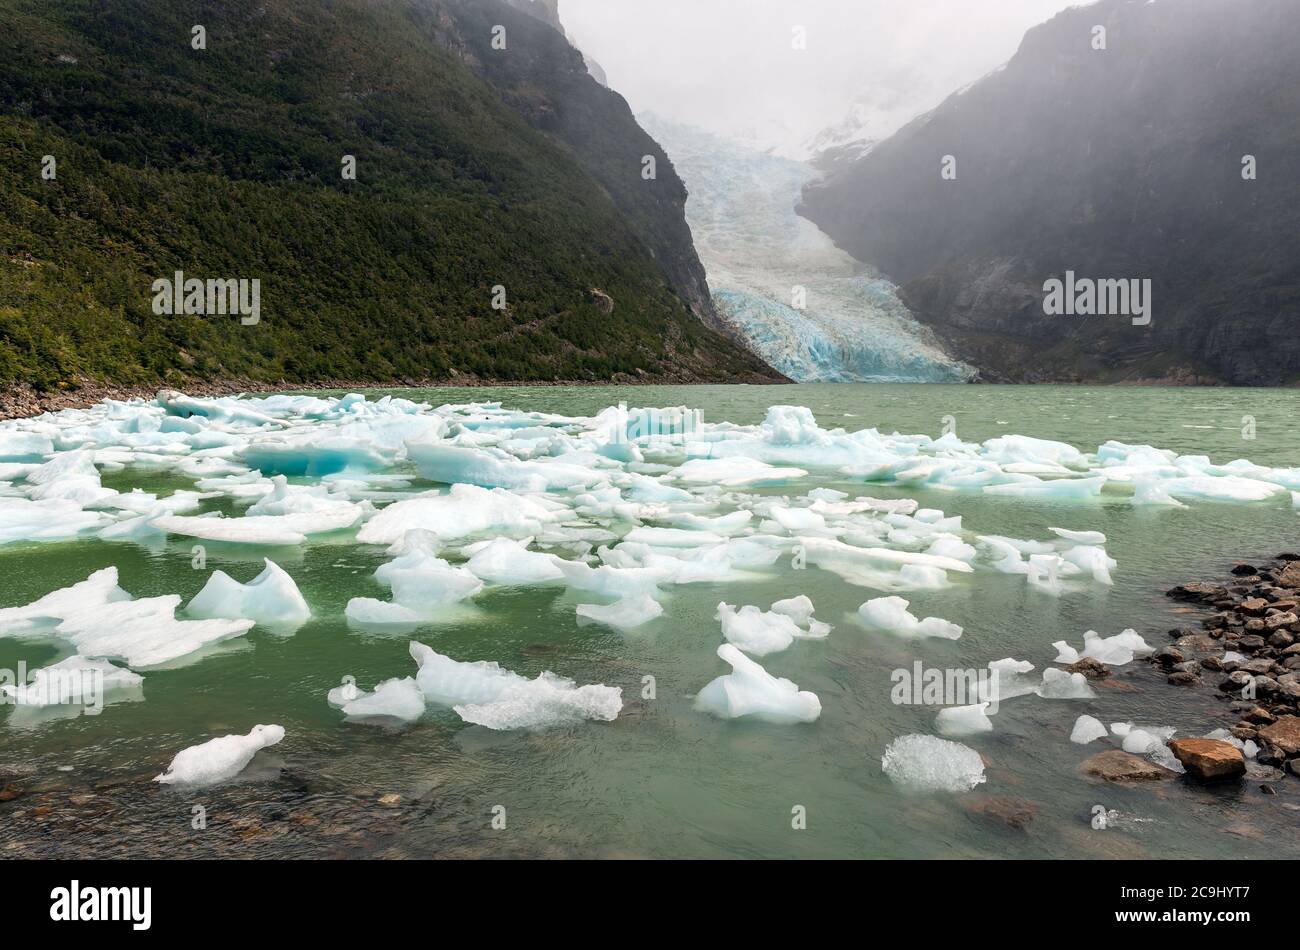 The receding Serrano Glacier in the mist losing ice due to climate change, Bernardo O´Higgins National Park, Patagonia, Chile. Stock Photo